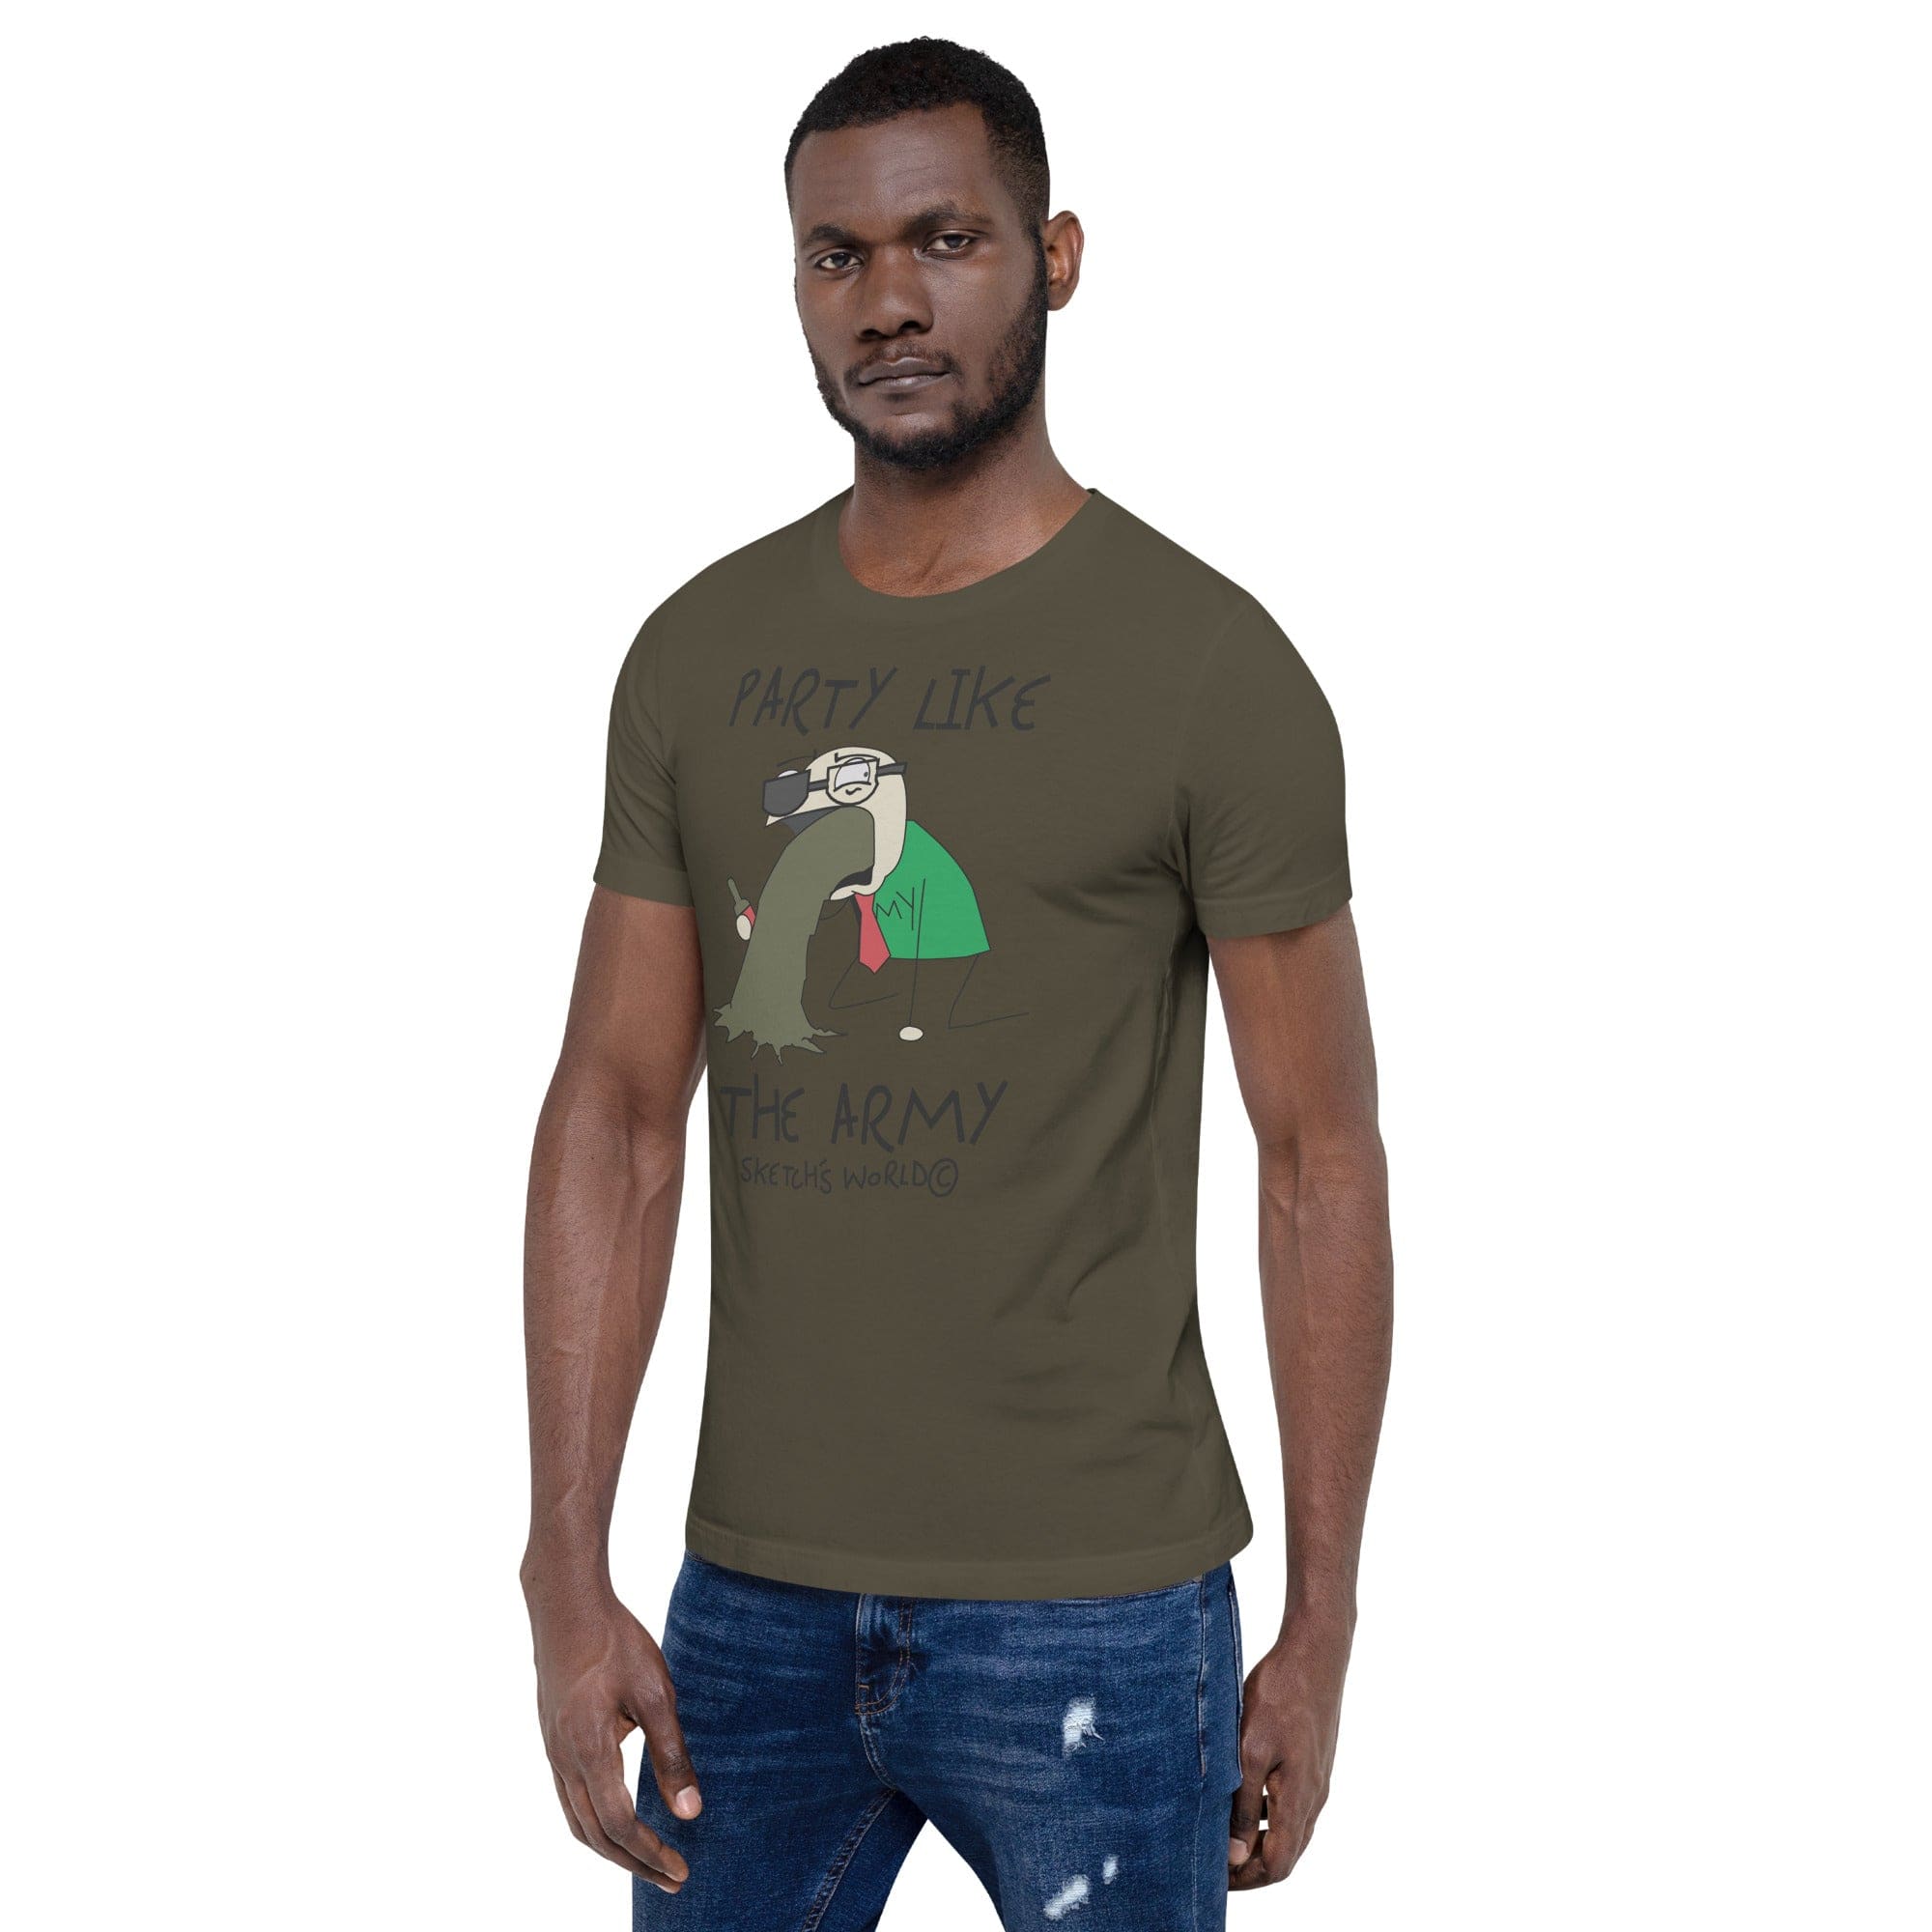 Tactical Gear Junkie Sketch's World © Officially Licensed - Party Like the Army Unisex T-Shirt